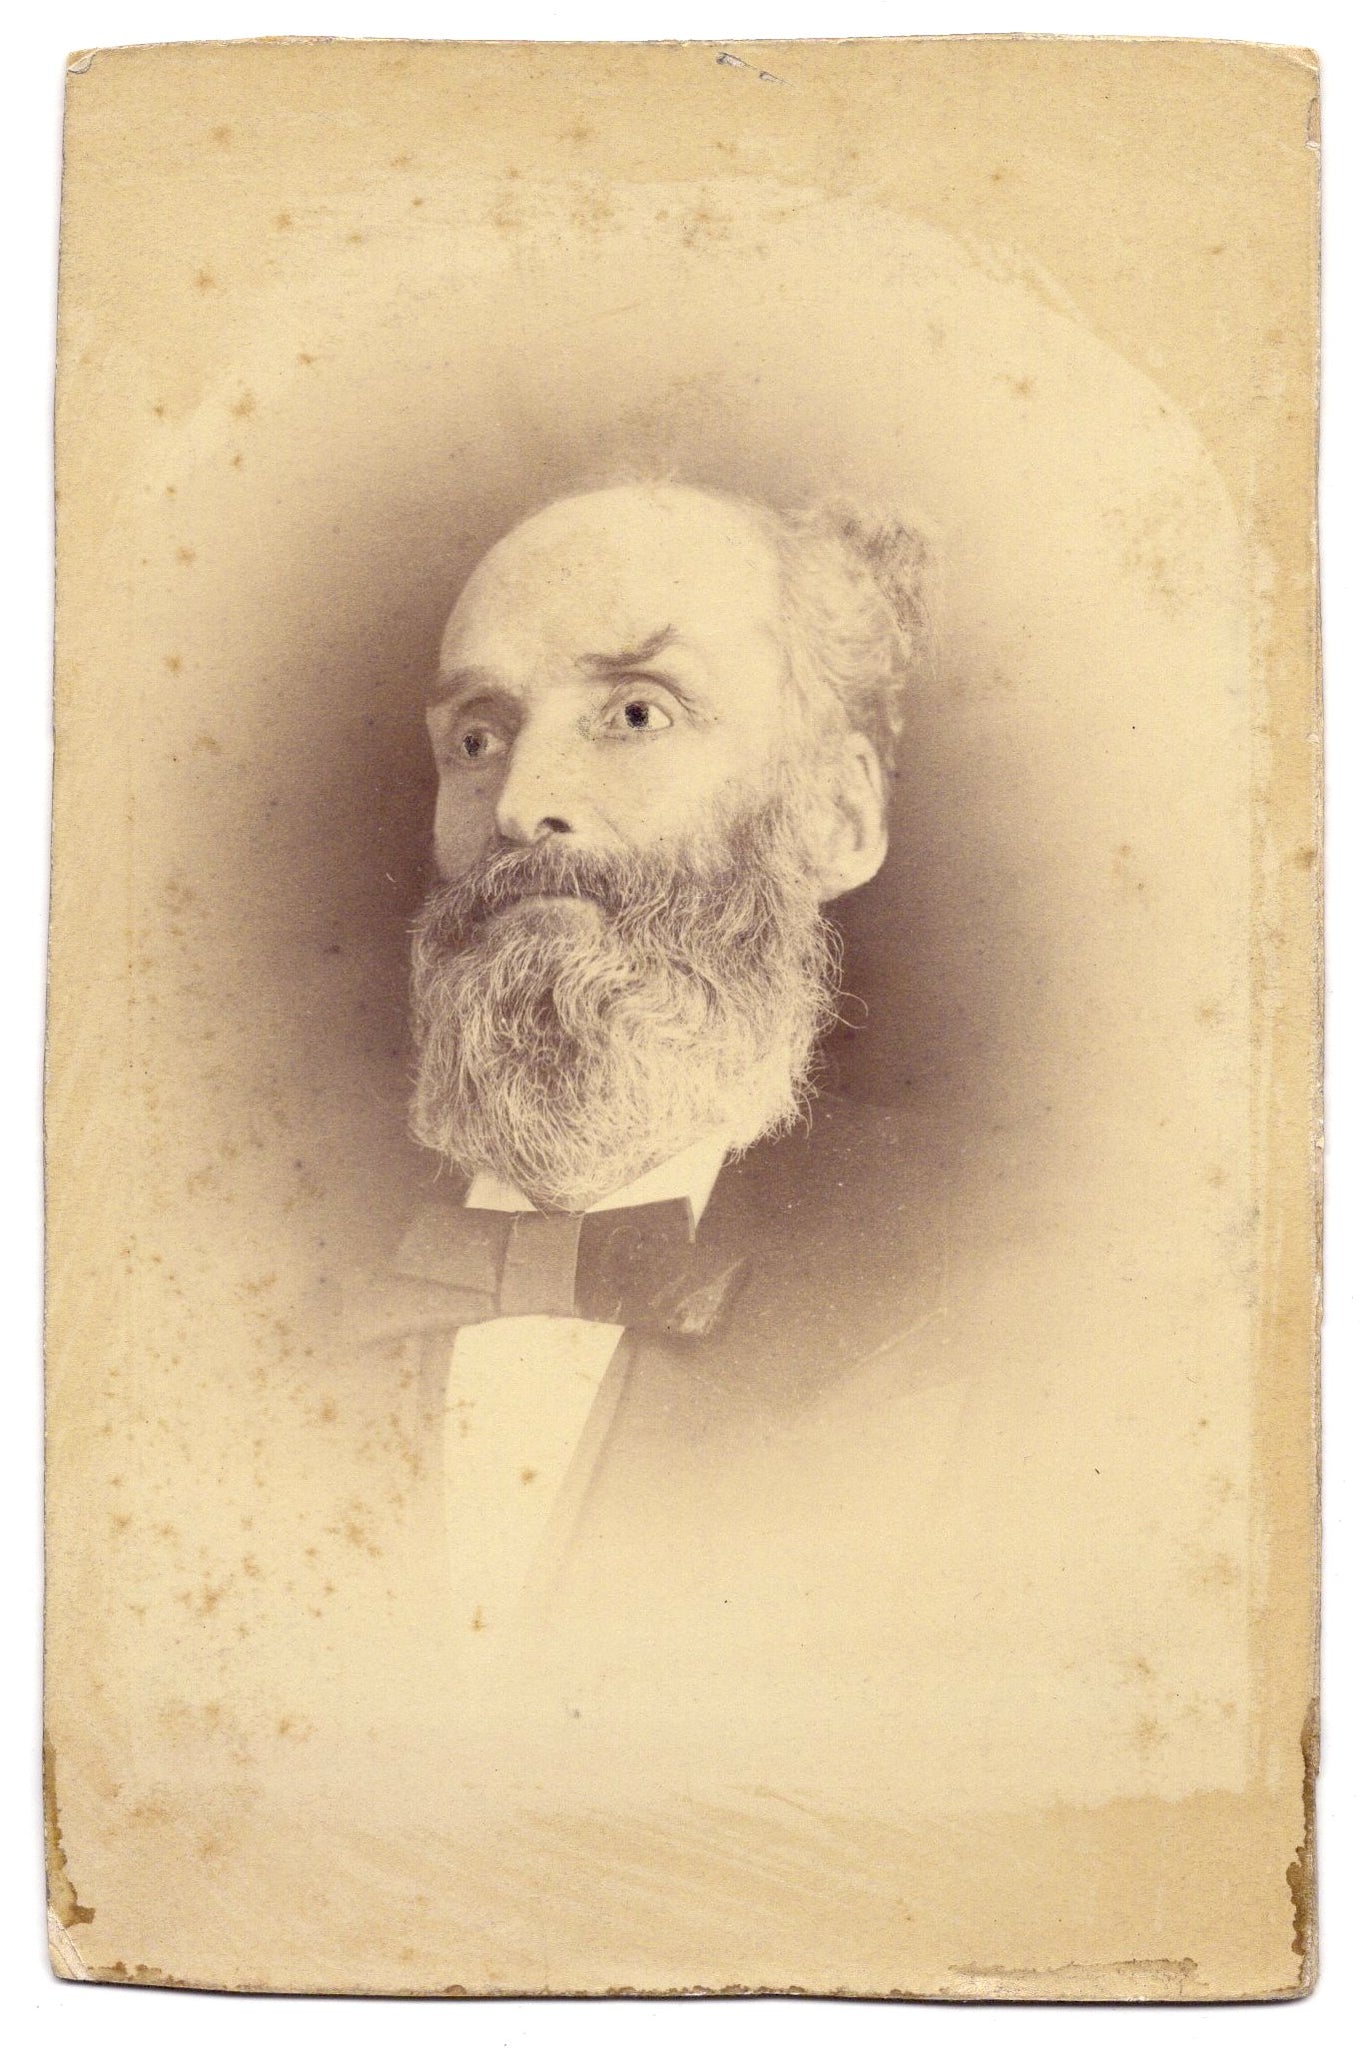 Studio portrait of an artificially wide-eyed man (Victorian Post-Mortem photograph)